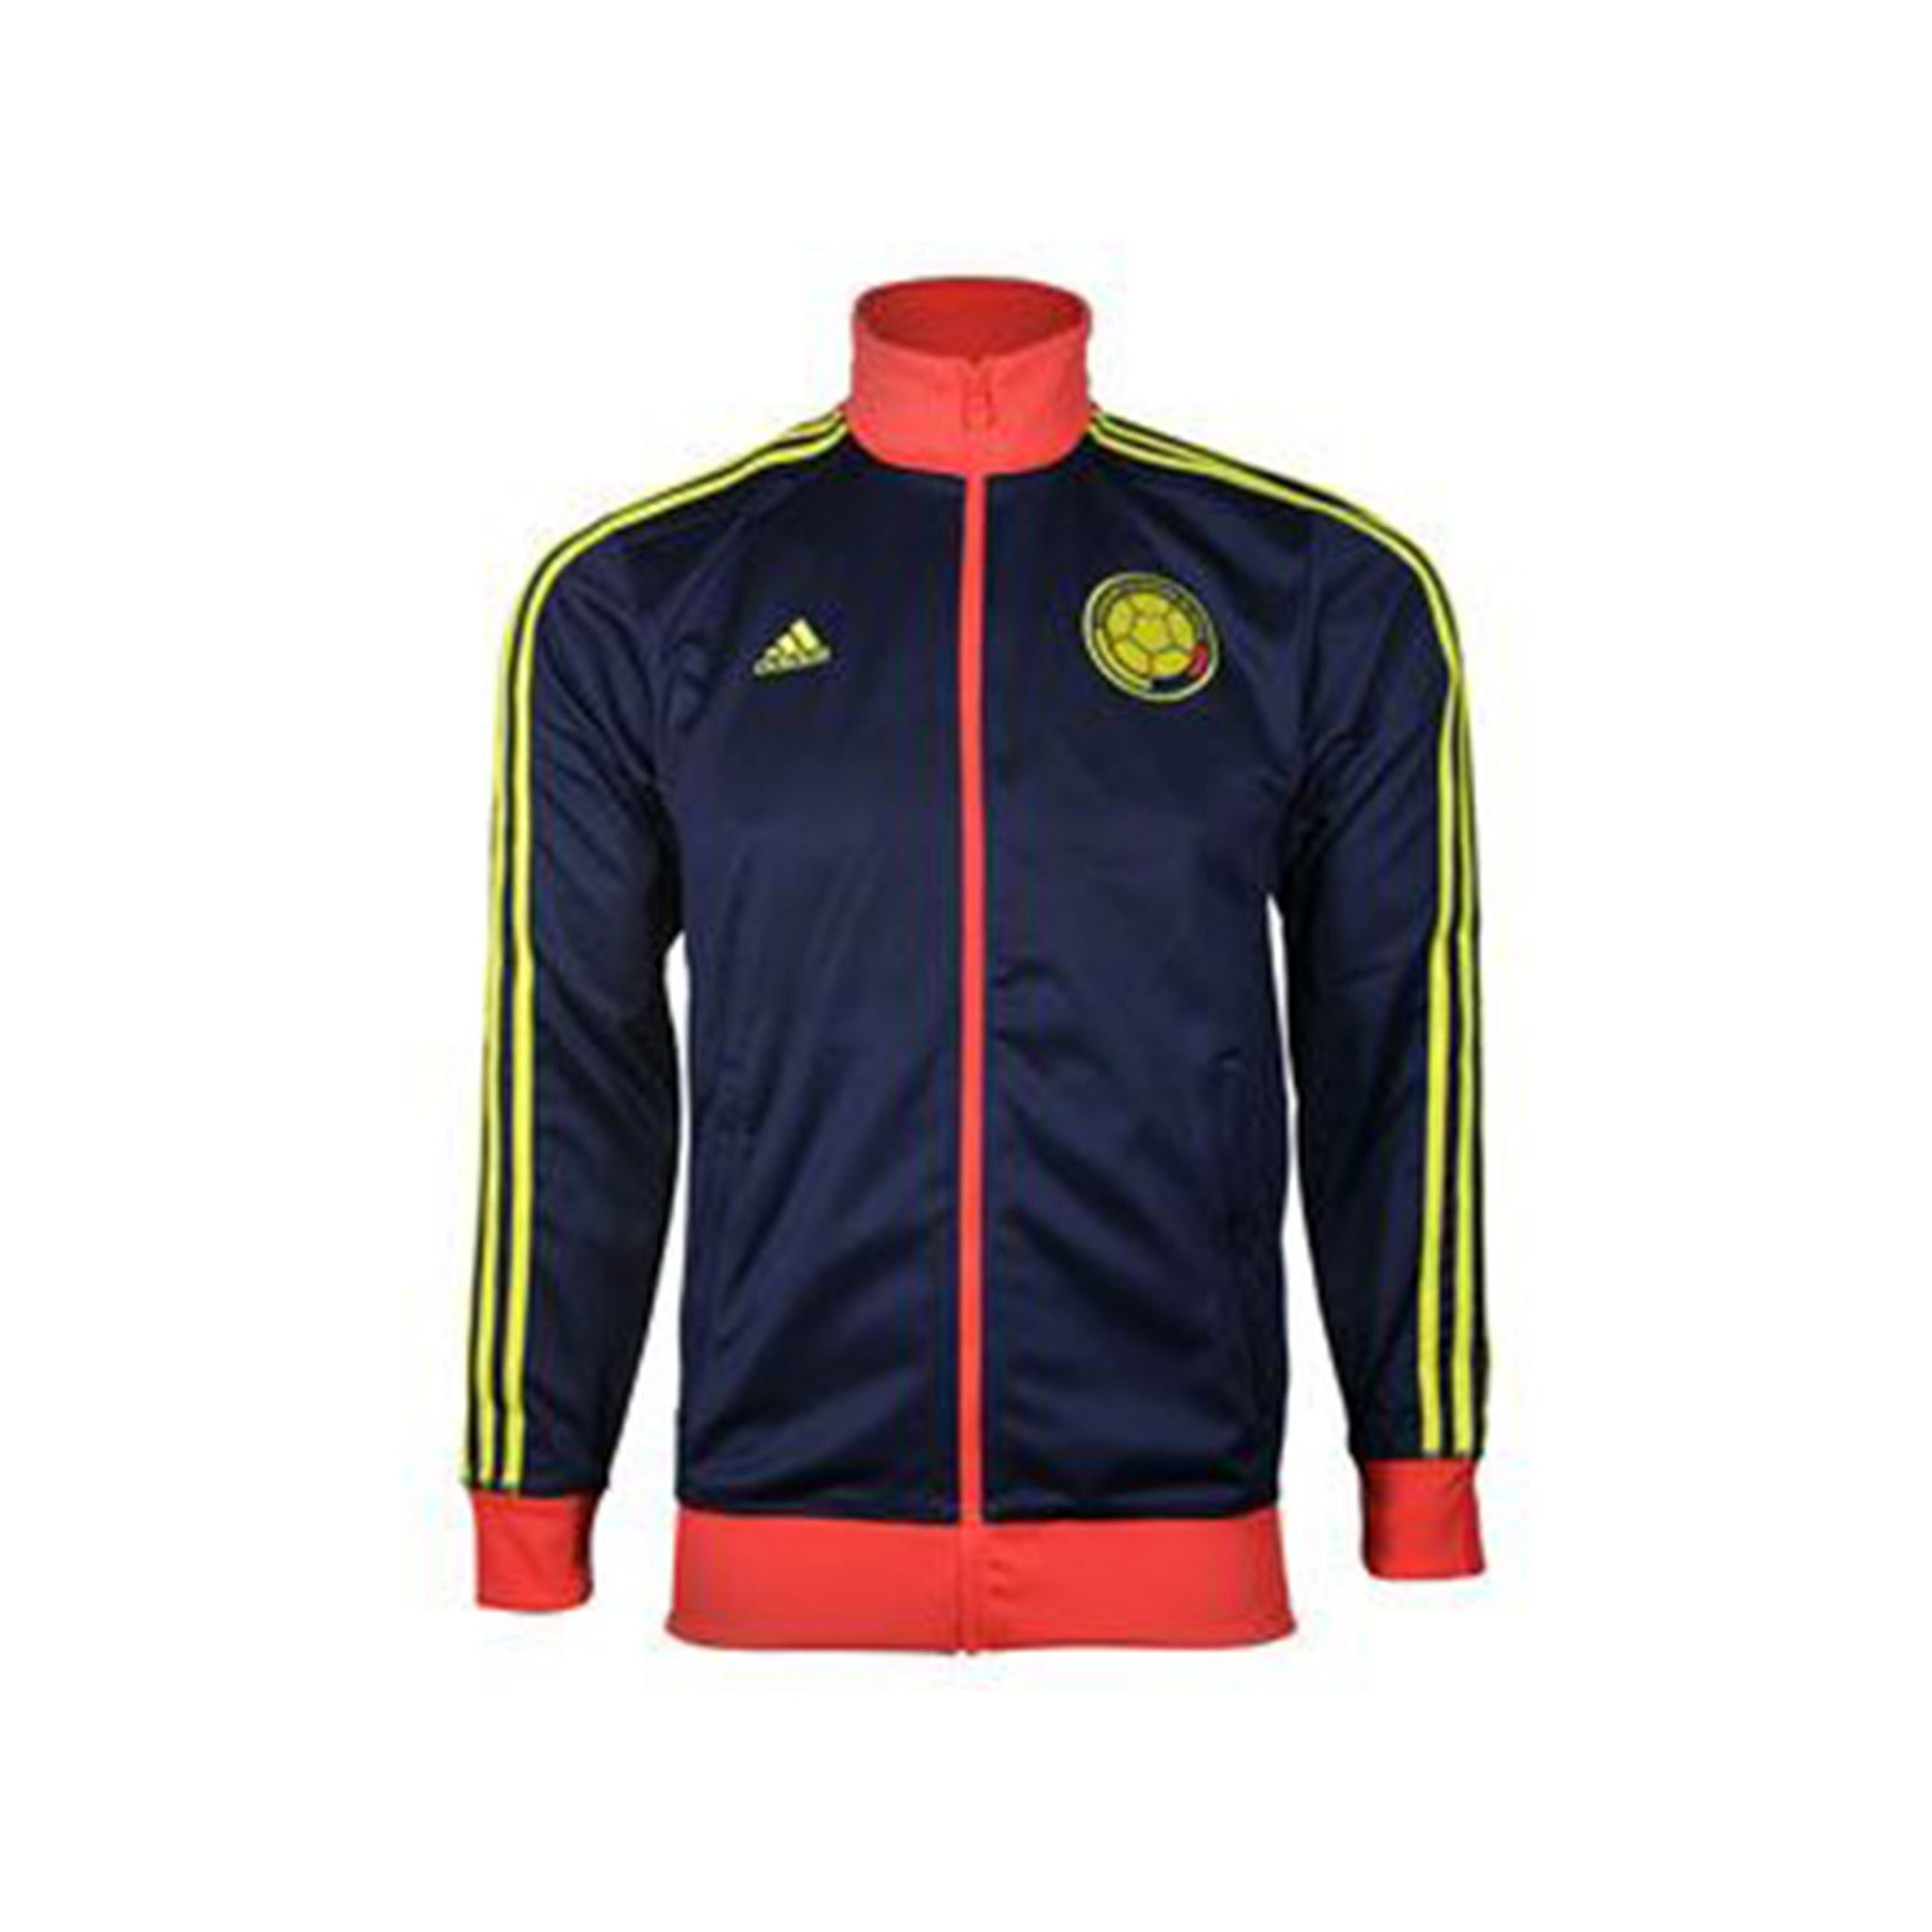 ADIDAS Colombia Track Top Jacket 2015